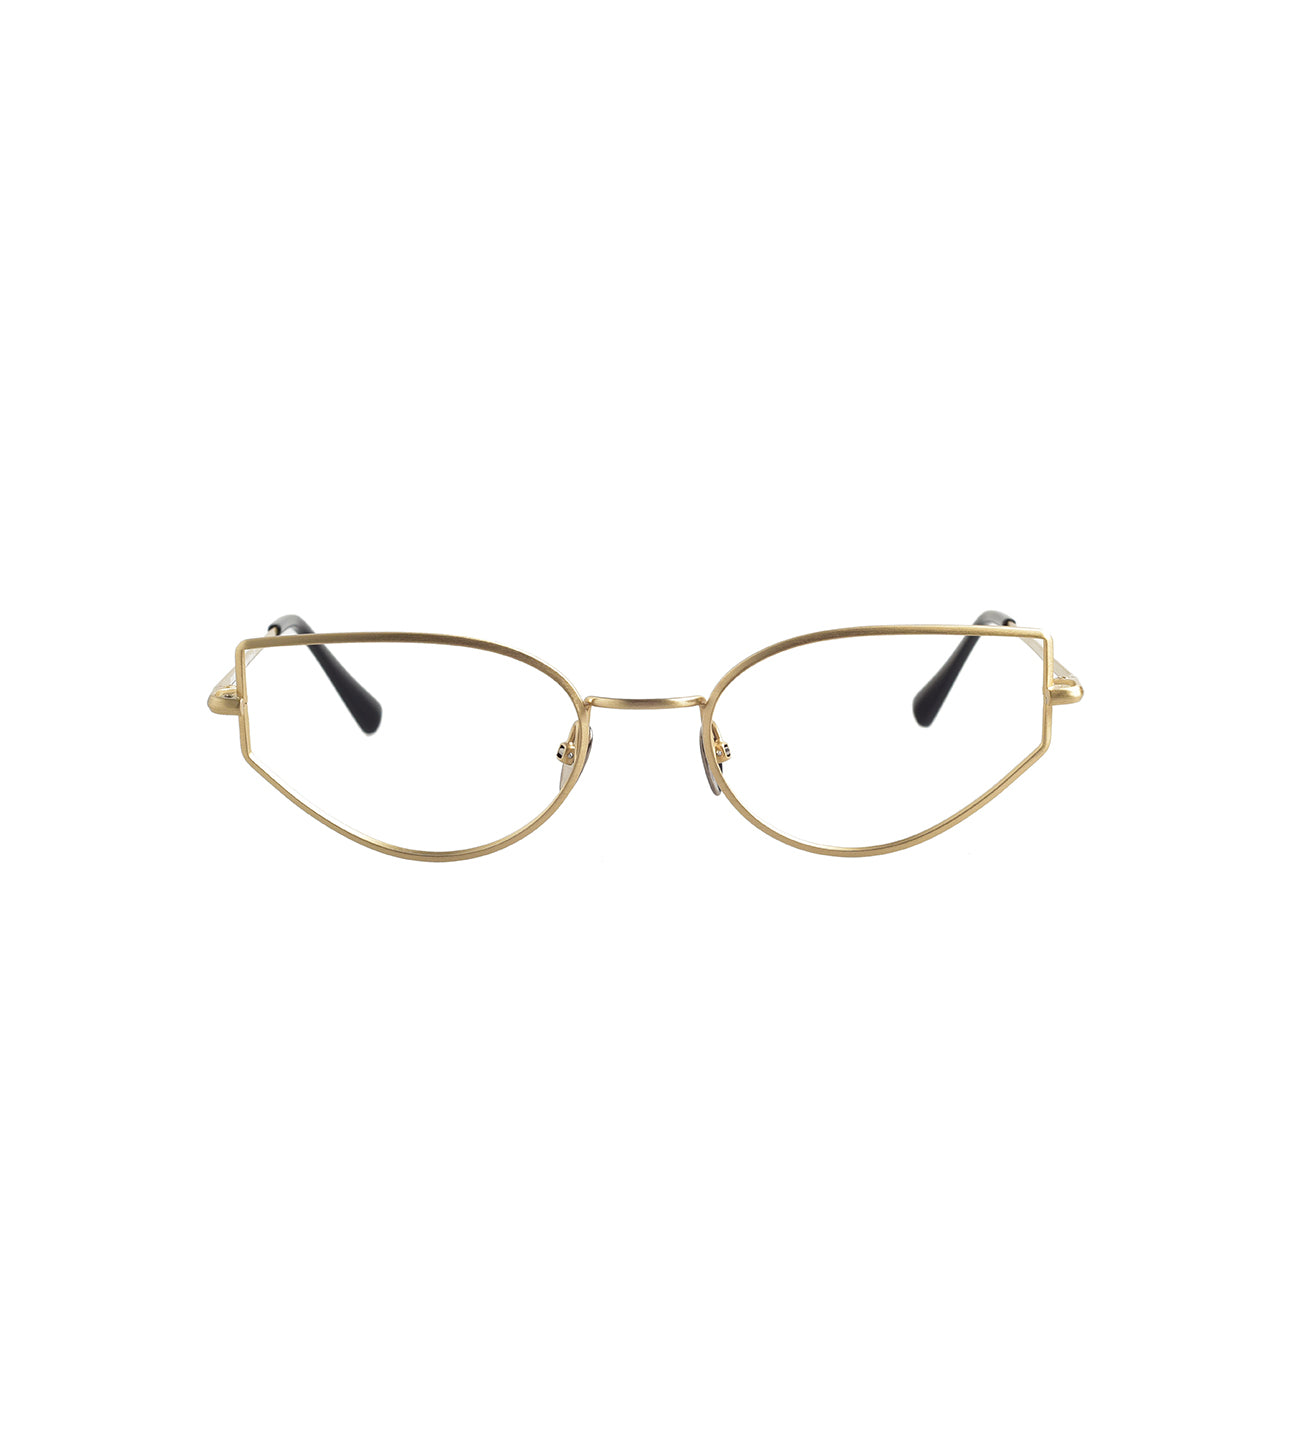 Lowe Optical Glasses | Brushed Gold | Danielle Rattray